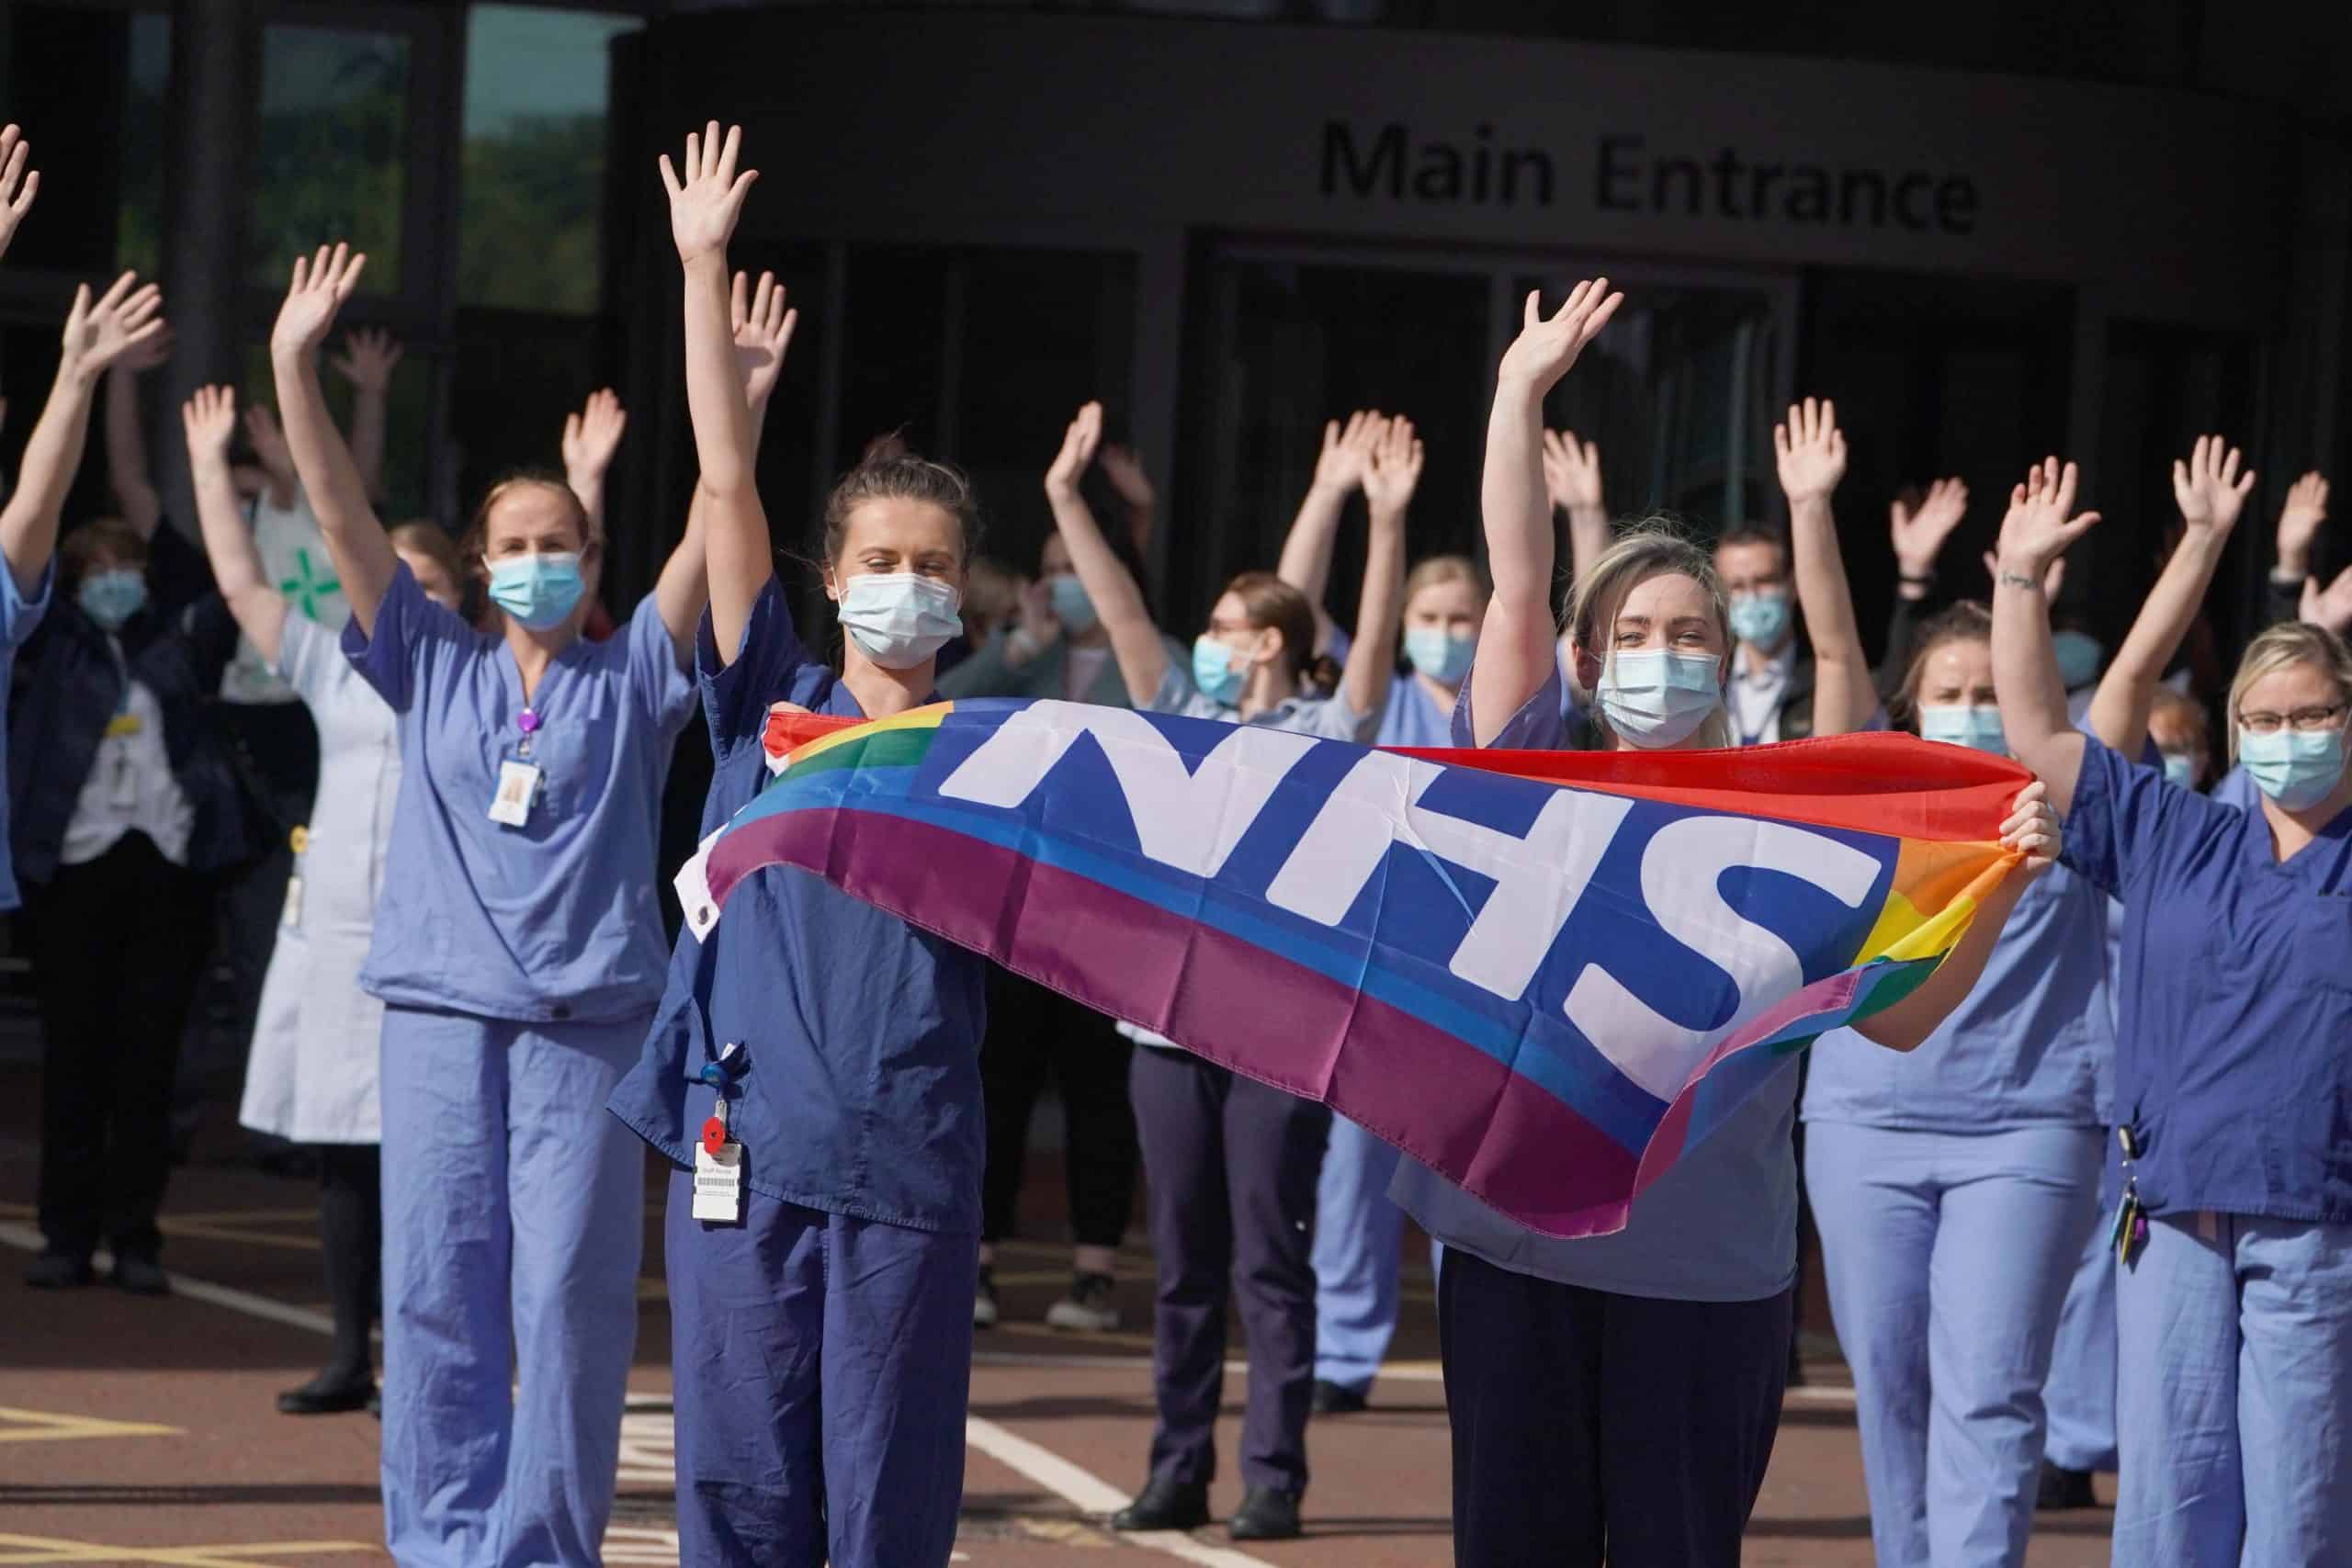 NHS ‘nothing special’ during the pandemic, right-wing think tank argues